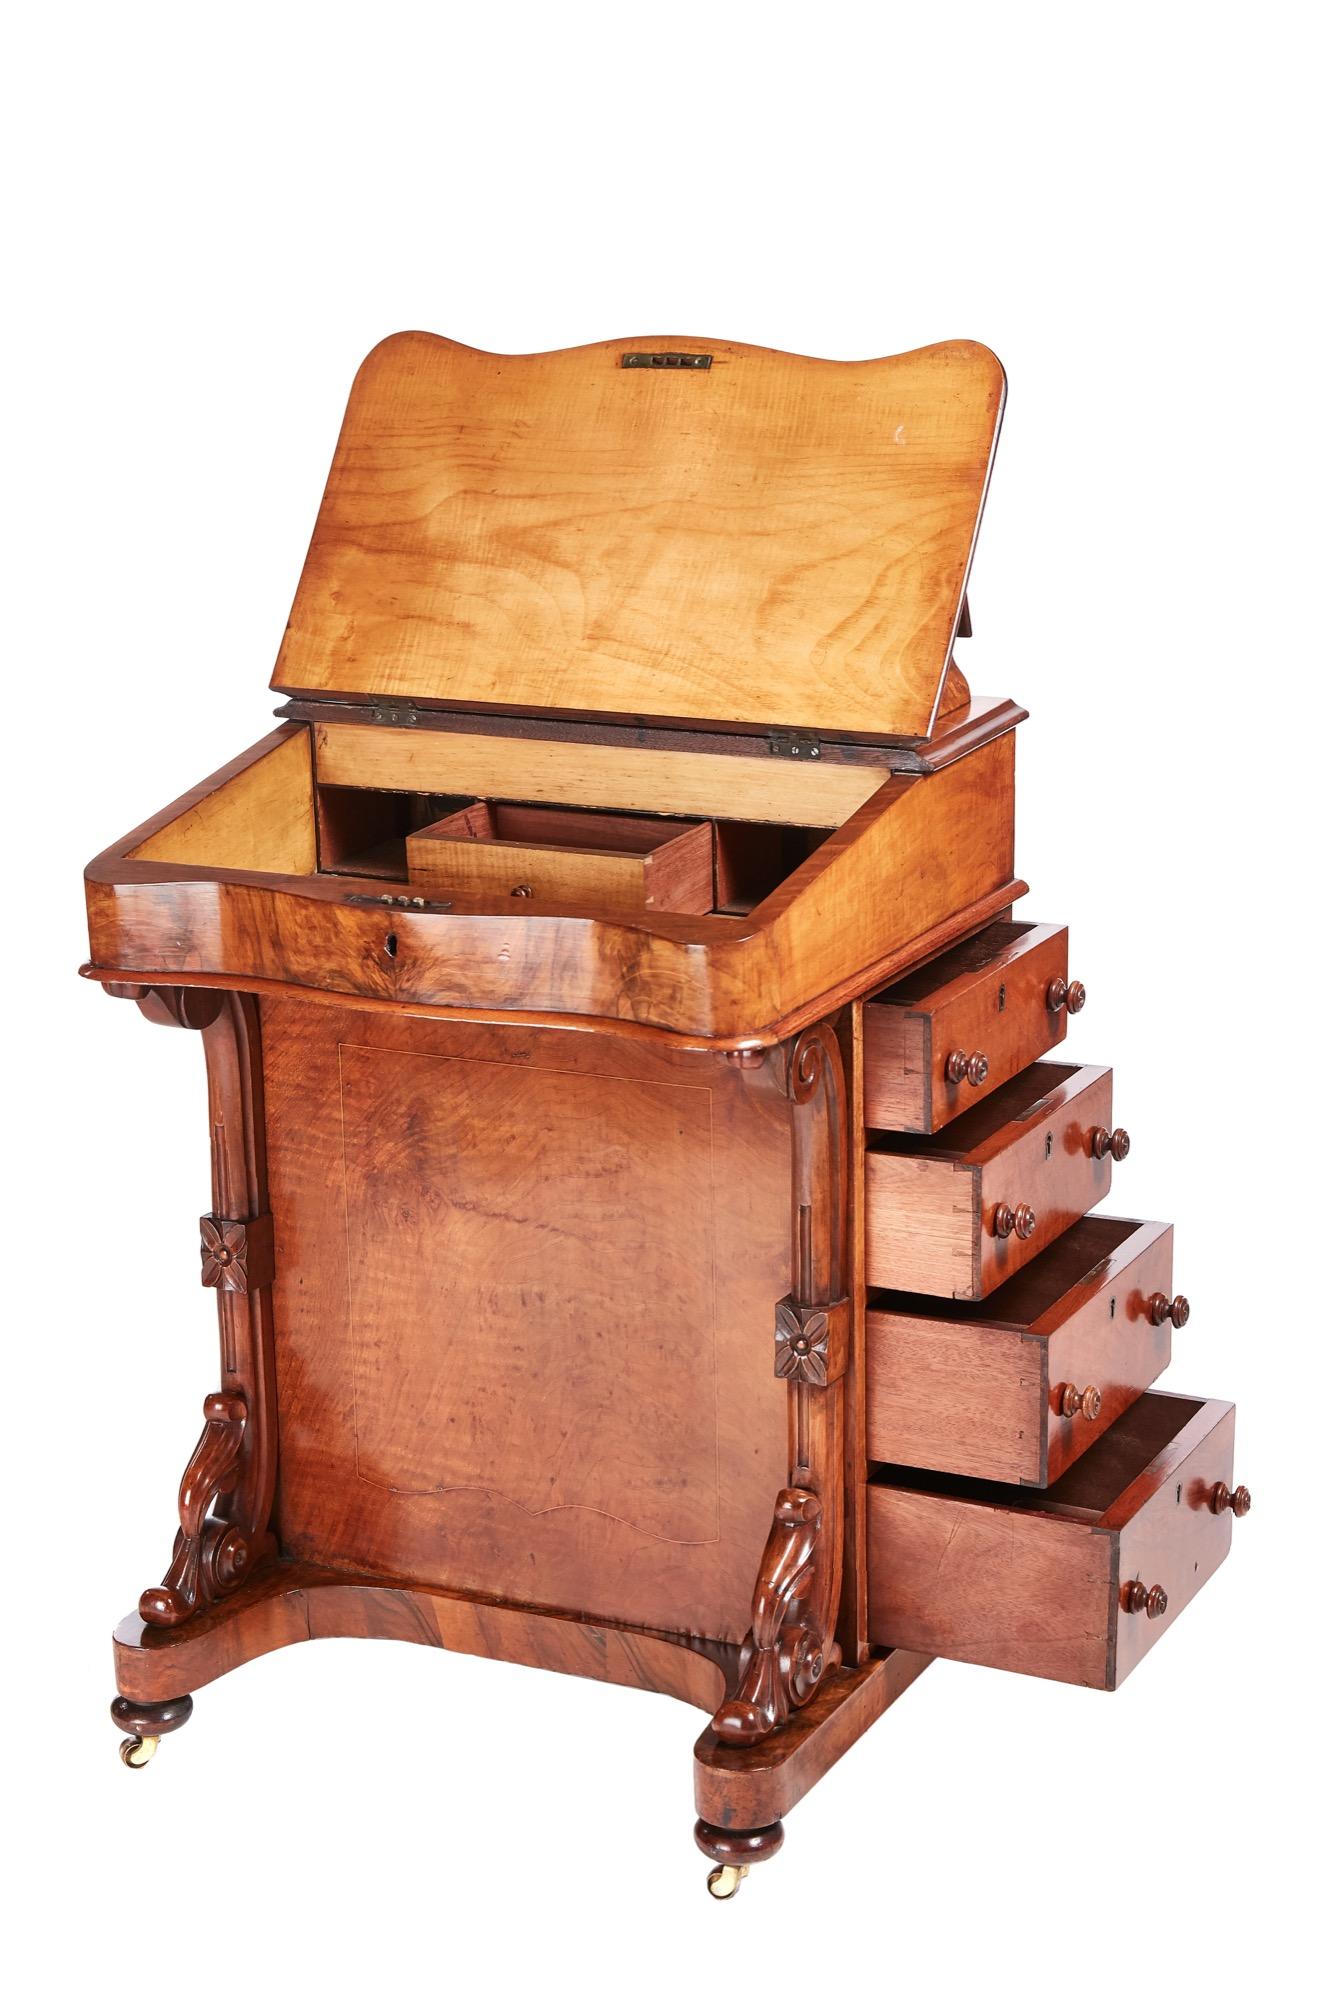 Victorian burr walnut inlaid Davenport. The lid lifts to reveal a lovely fitted interior, it has a serpentine front with carved supports. The right hand side has four drawers with original knobs, the left side has four false drawers with original